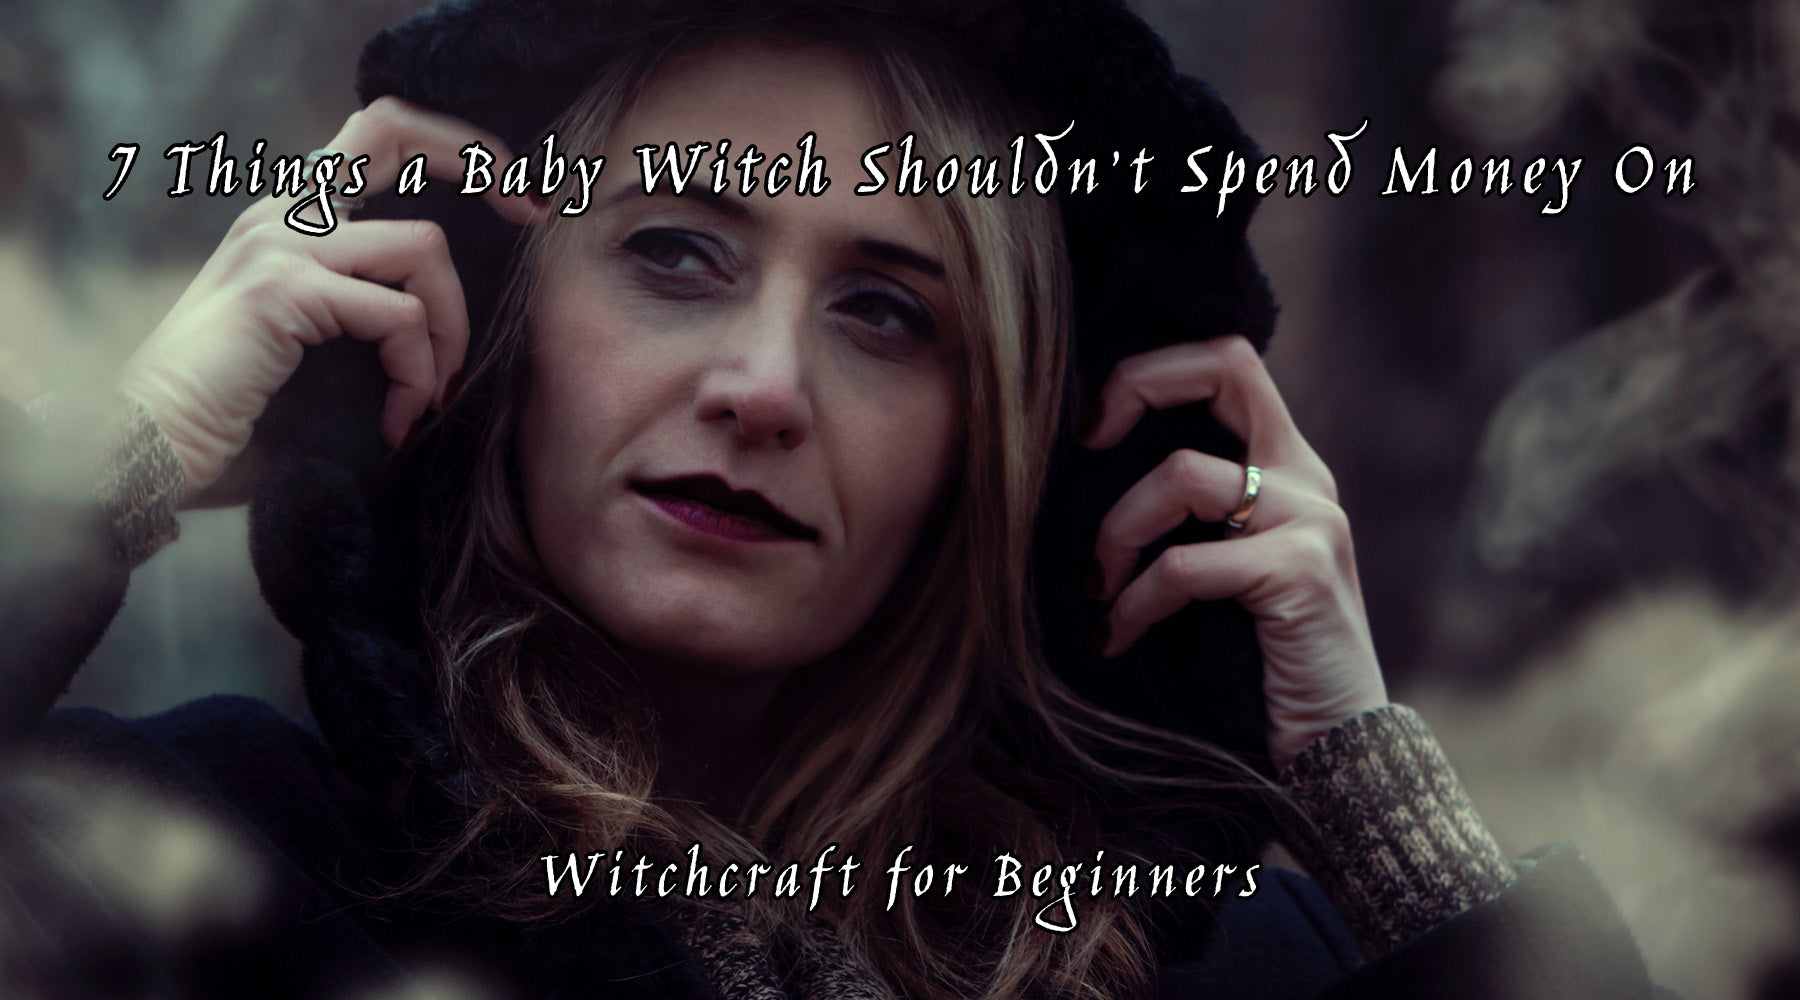 7 Things a Baby Witch Shouldn’t Spend Money On